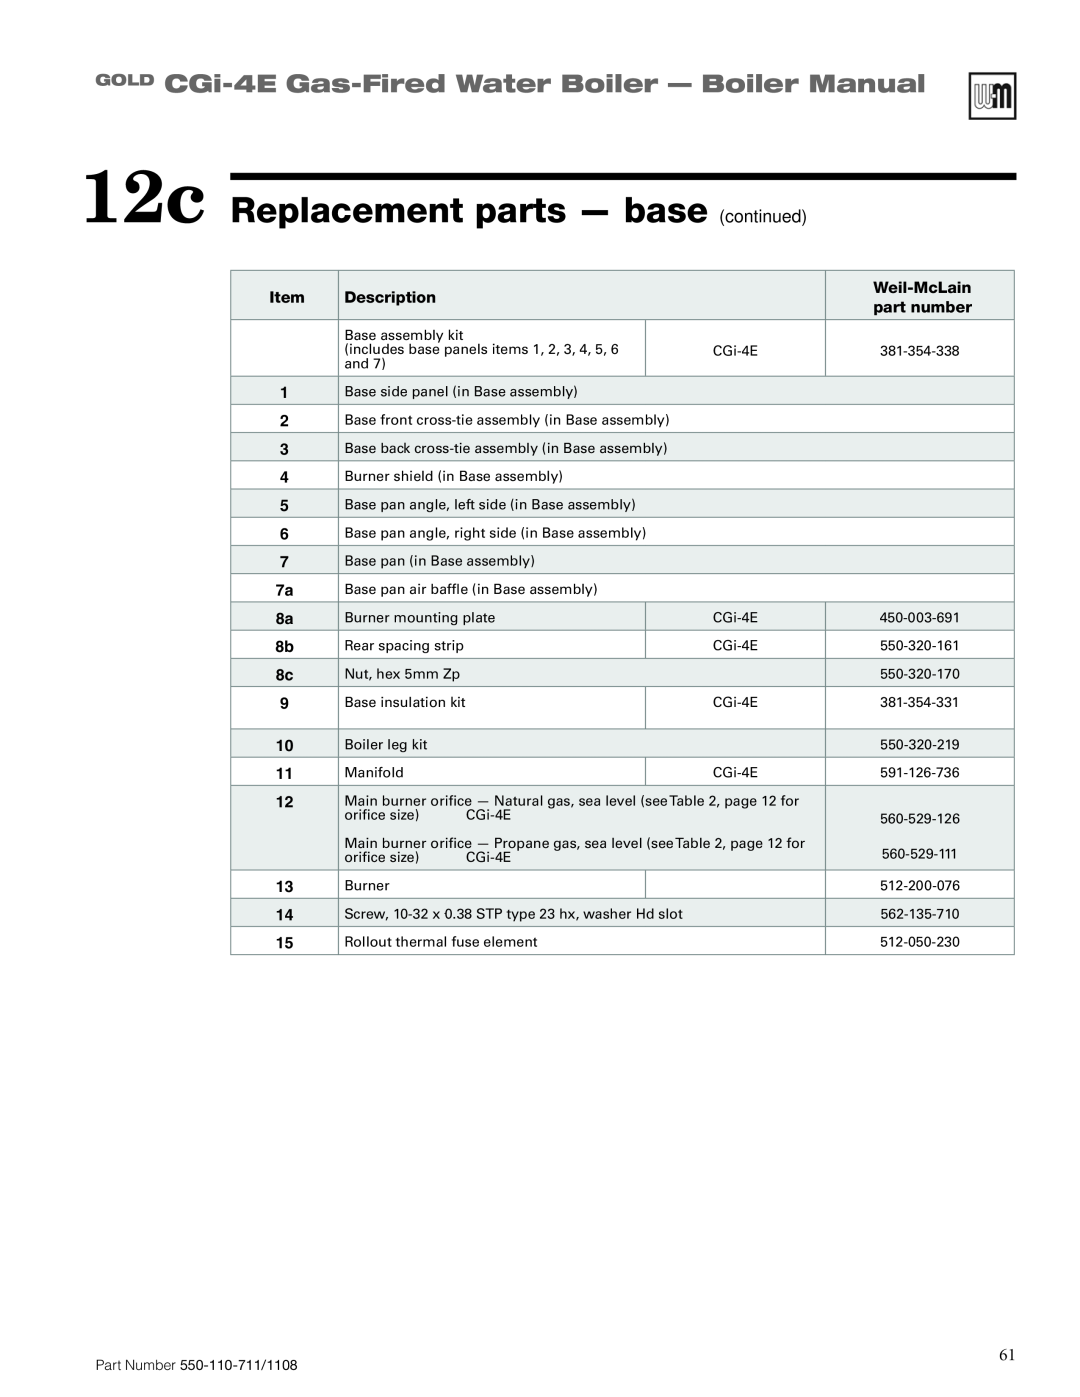 Weil-McLain CGI-4E manual 12c Replacement parts - base continued, GOLD CGi-4E Gas-FiredWater Boiler - Boiler Manual 